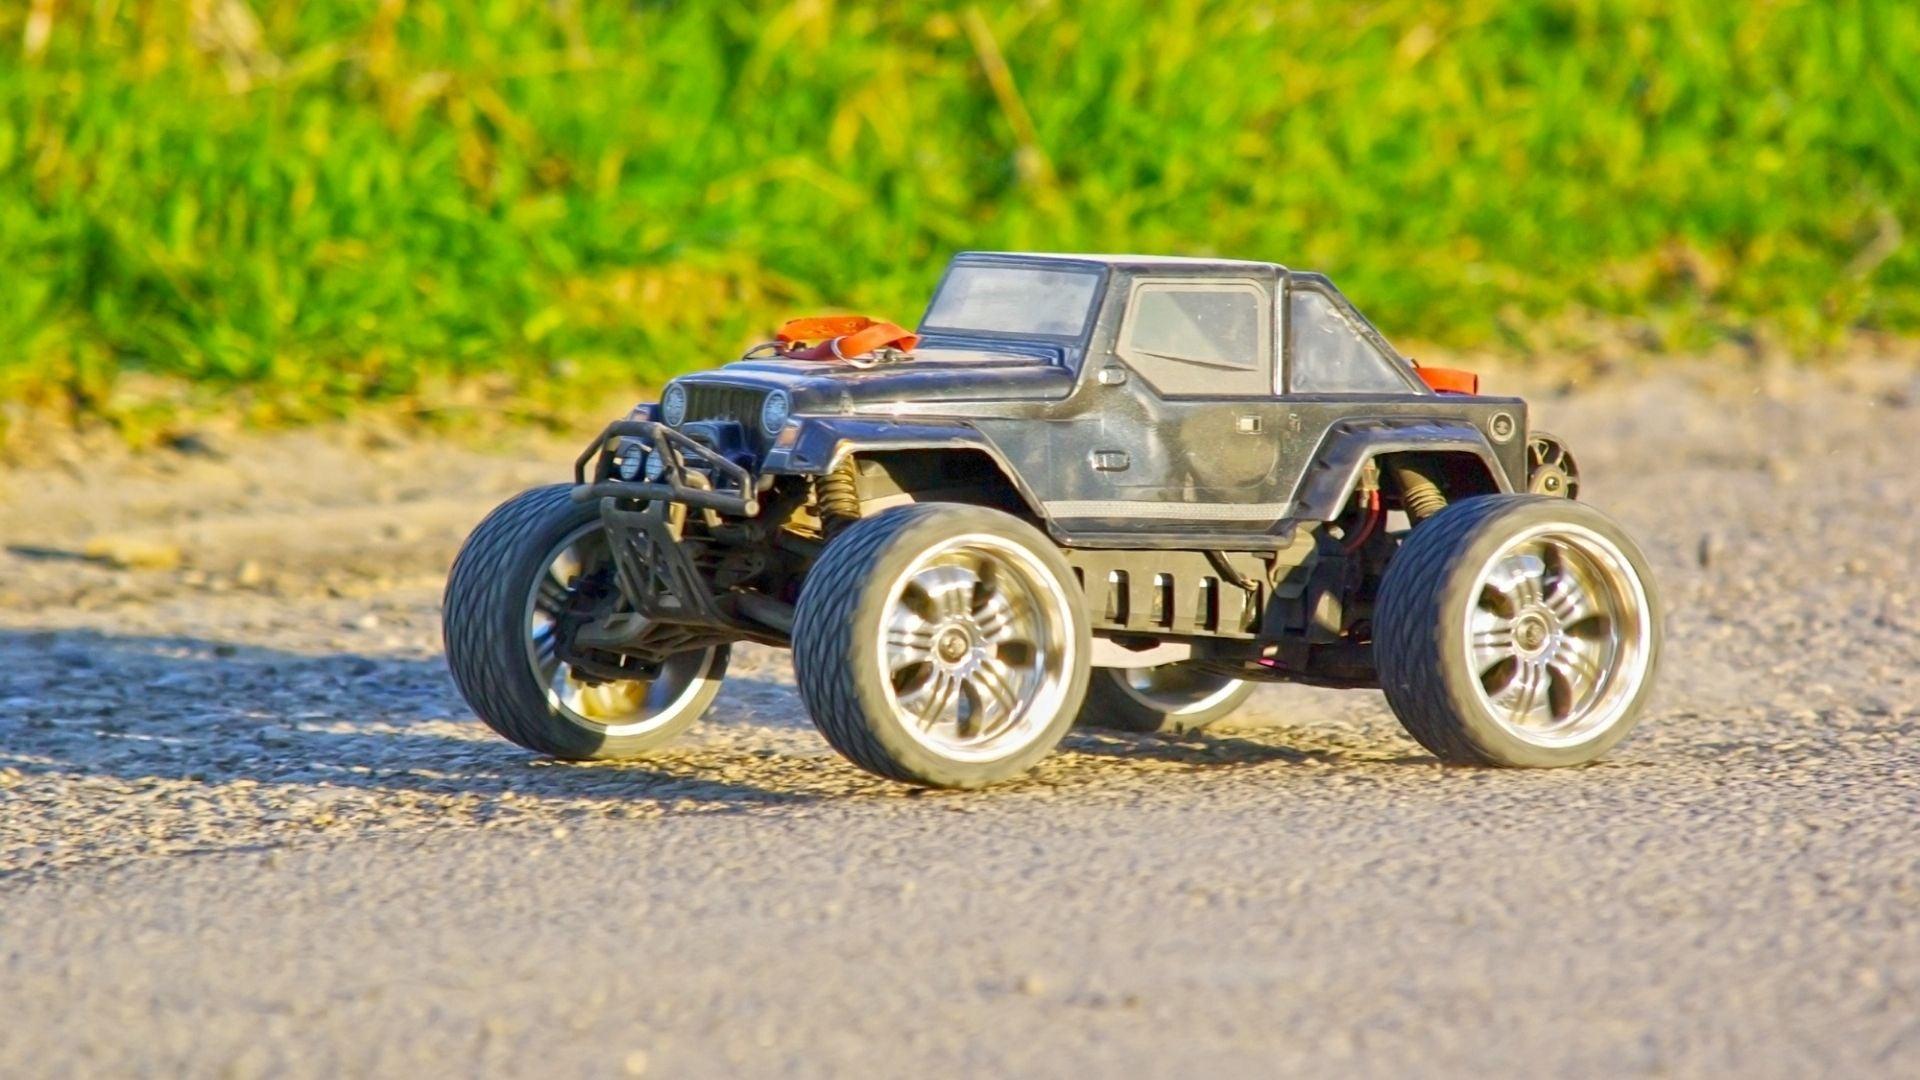 Best Rc Trucks 4X4 Off Road Waterproof:  Final Thoughts and Recommendations